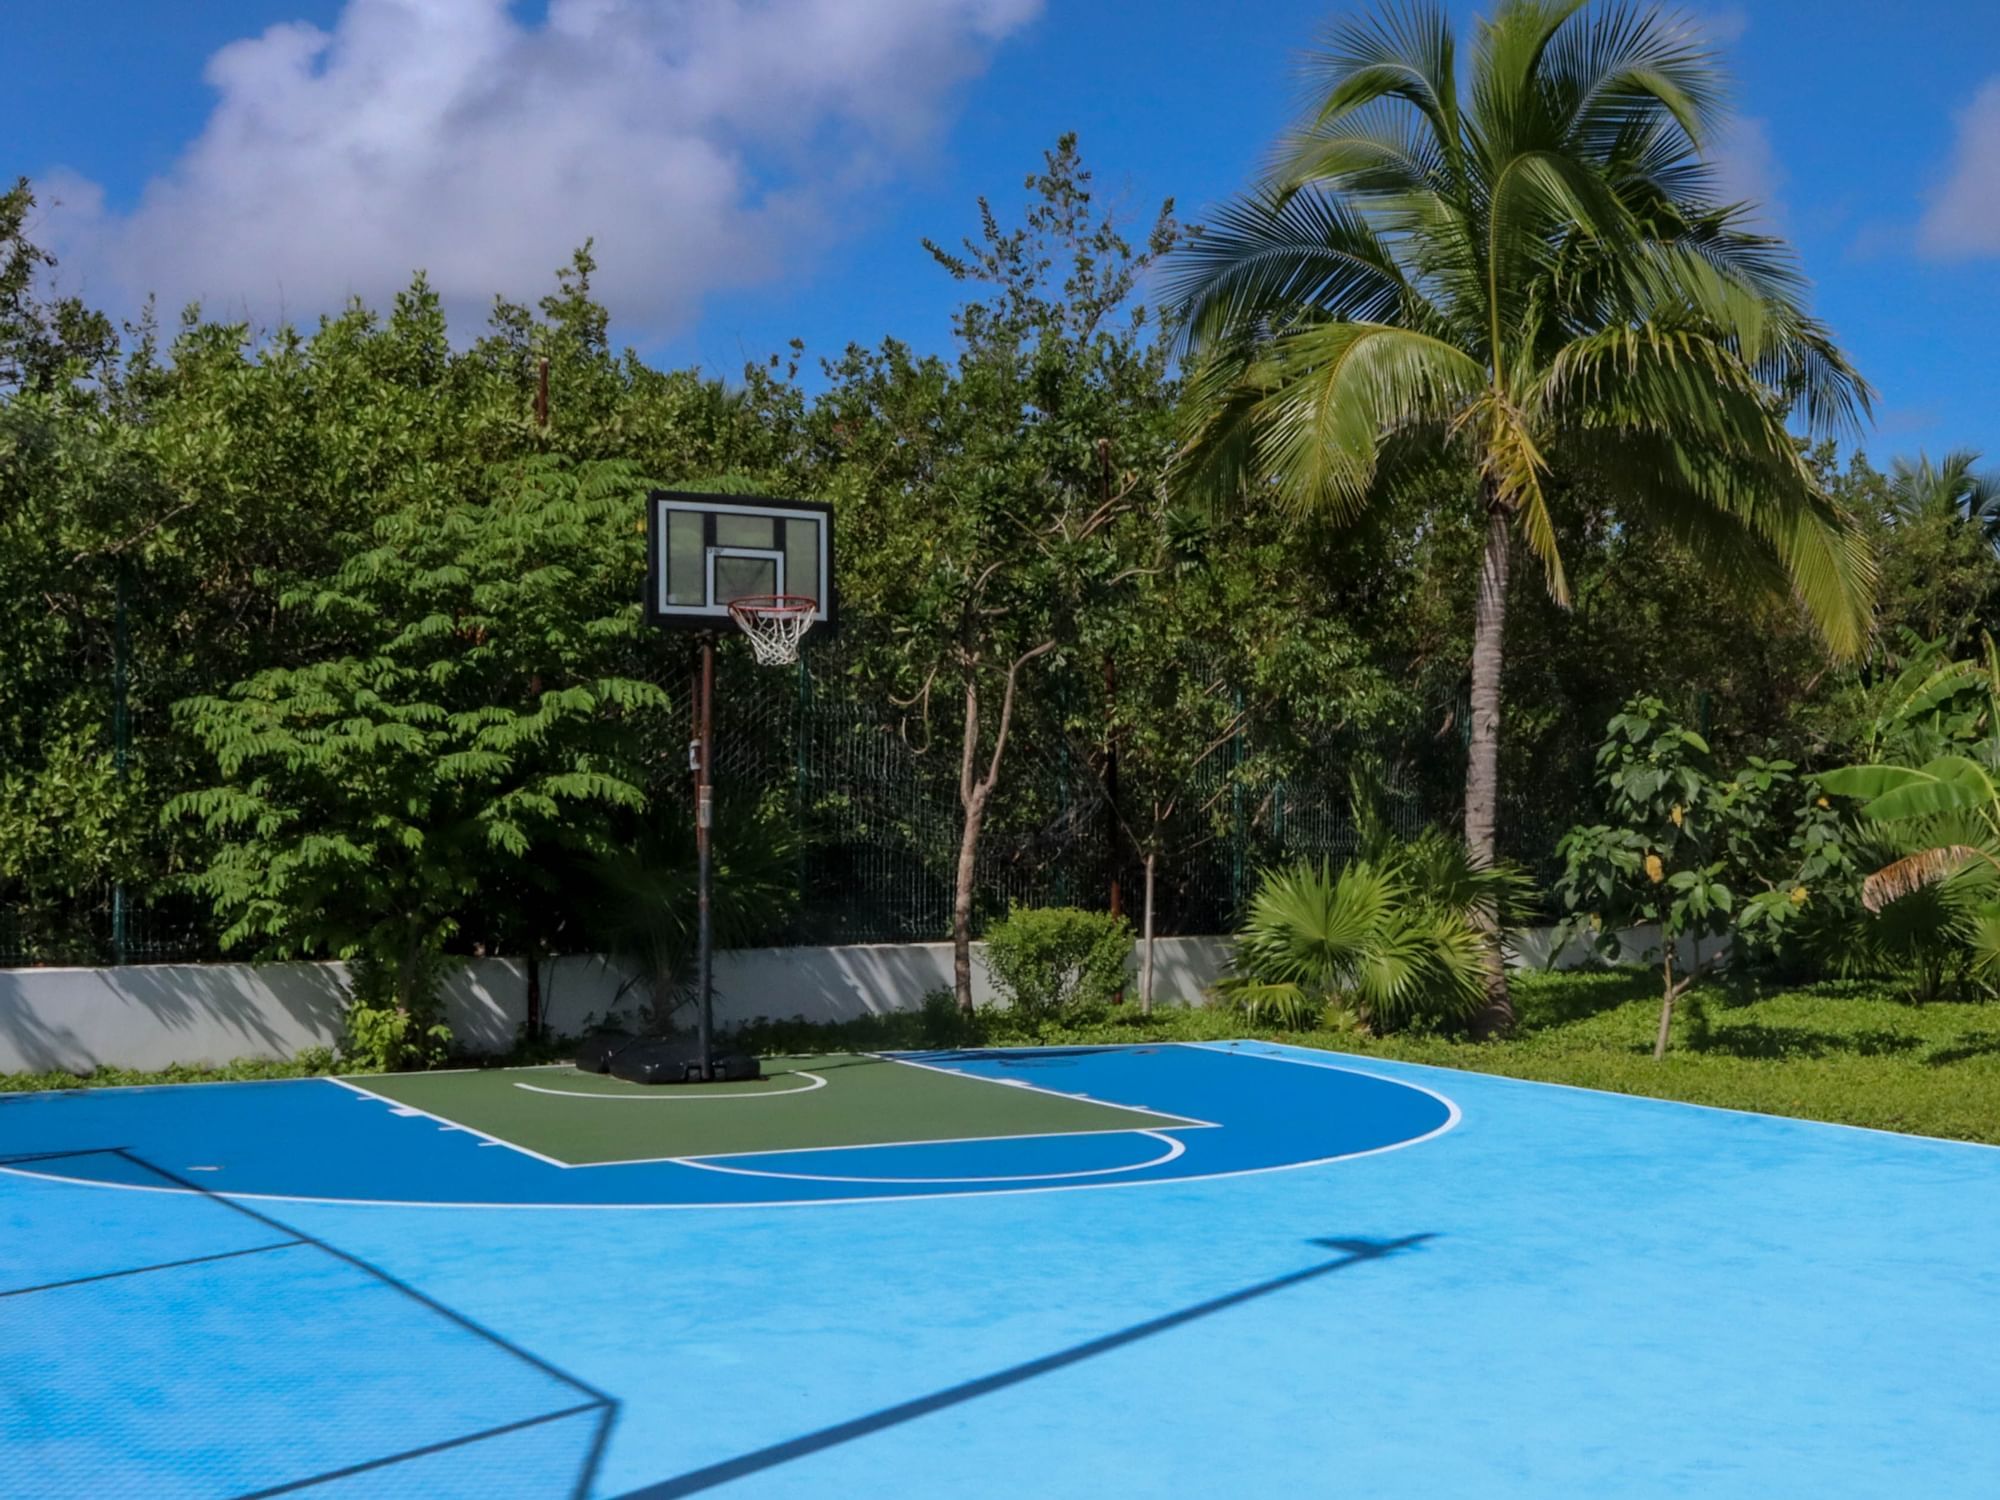 Close up on the basketball court at Haven Riviera Cancun